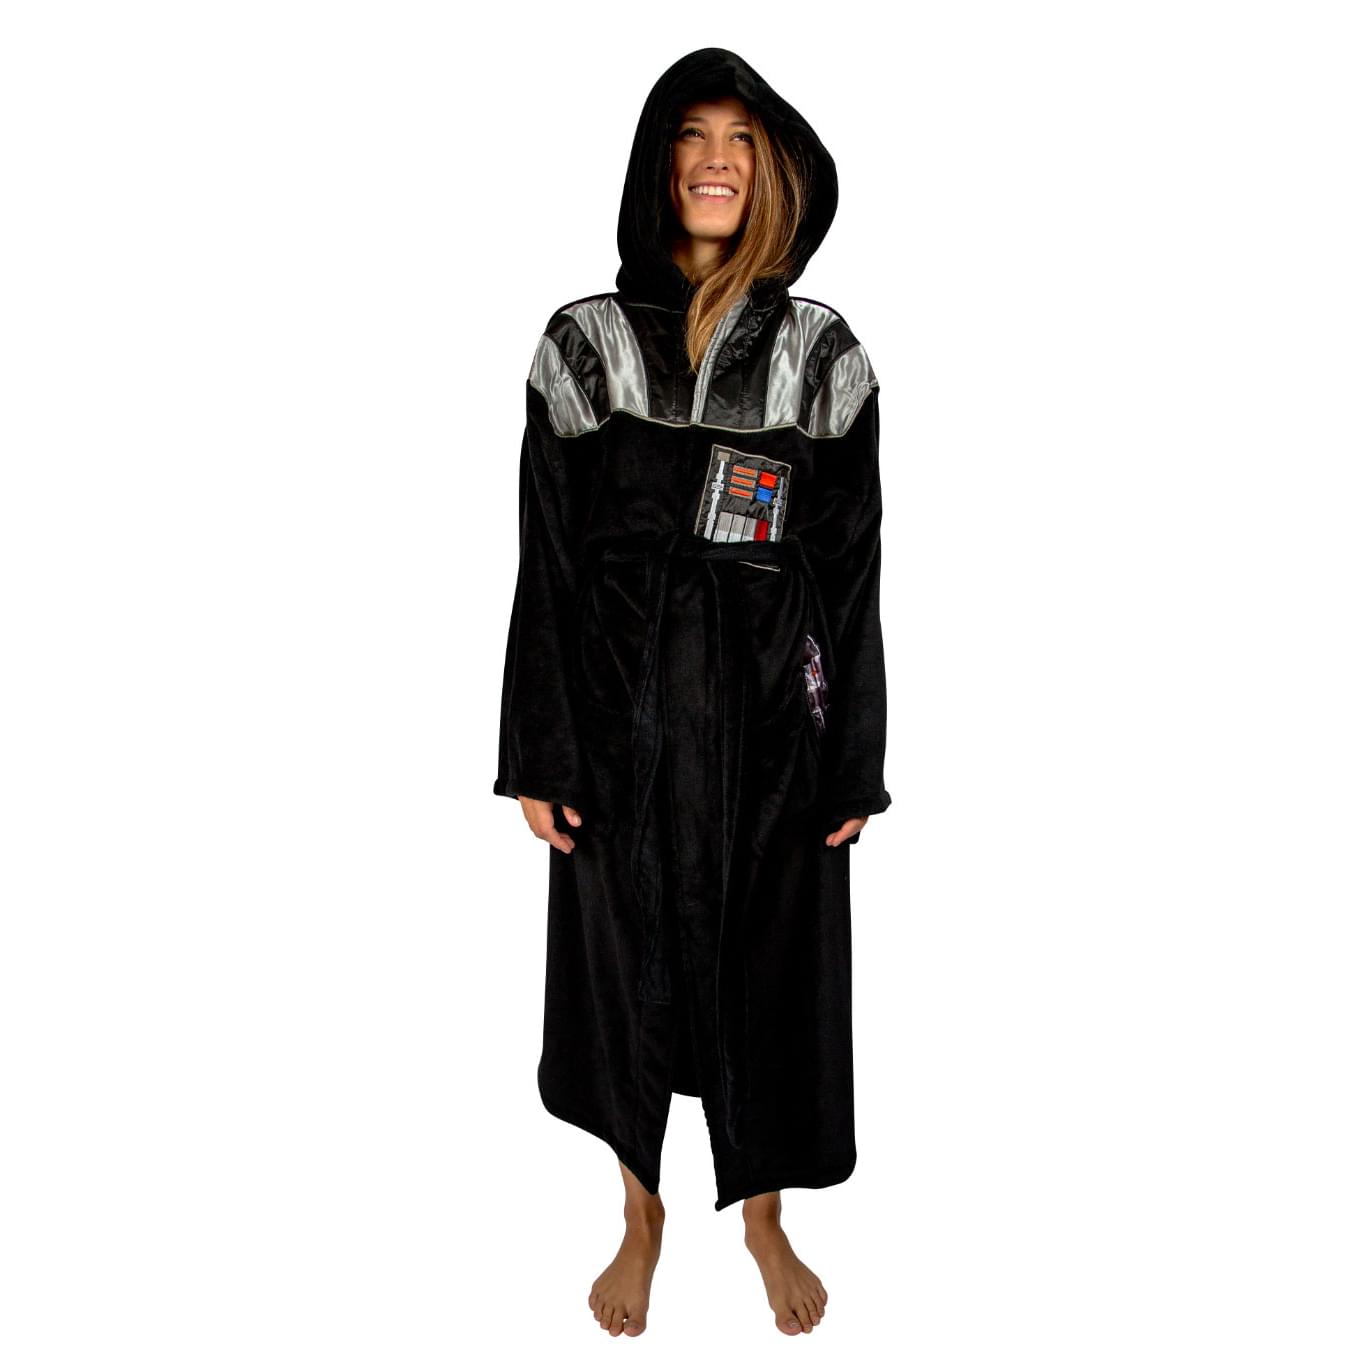 Star Wars Darth Vader Hooded Bathrobe for Men/Women | One Size Fits Most Adults